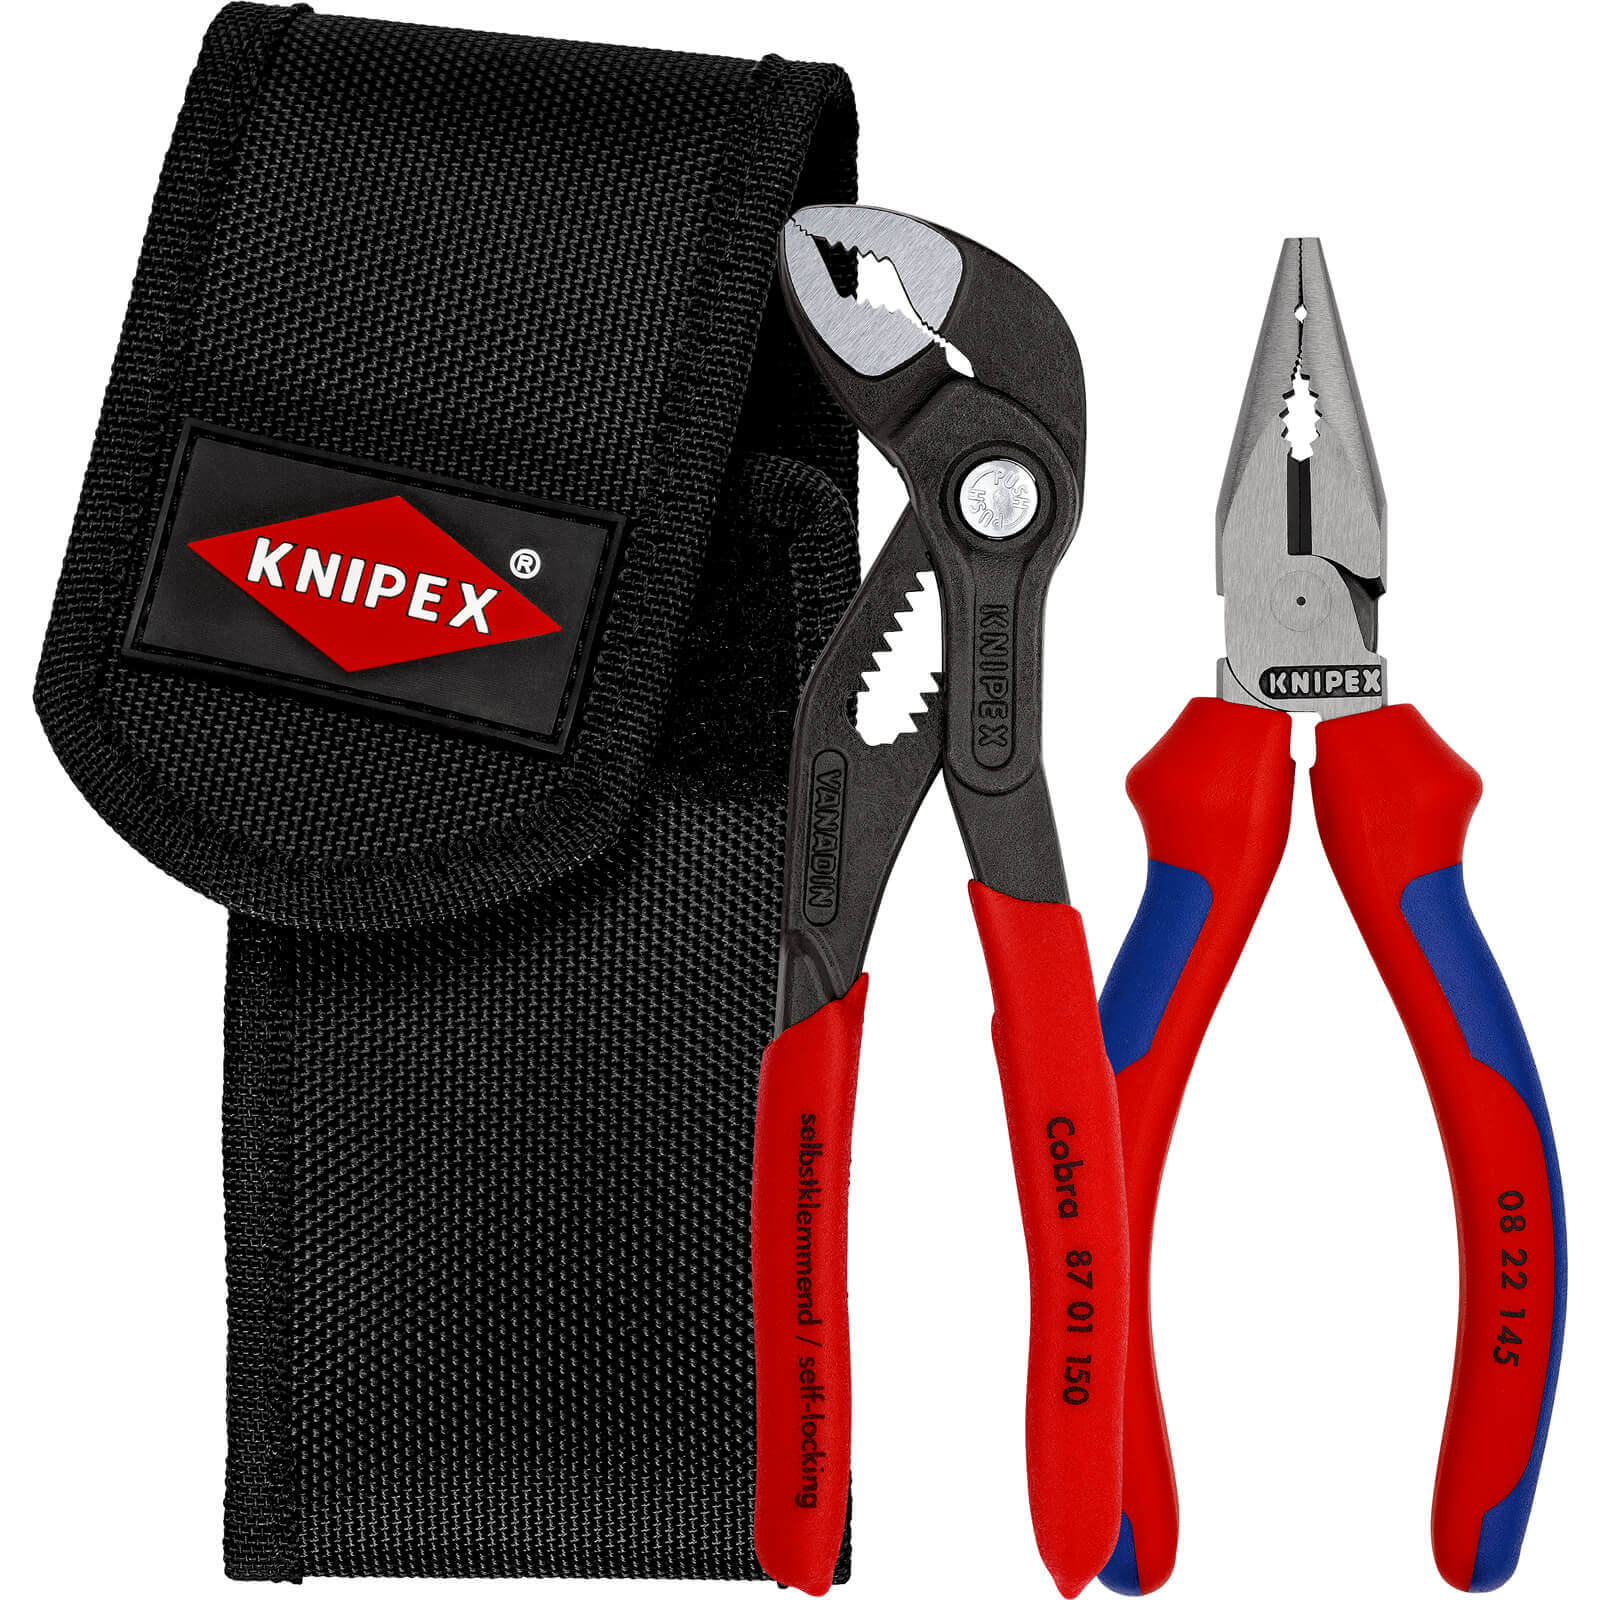 Image of Knipex 20 72 2 Piece Plier Set